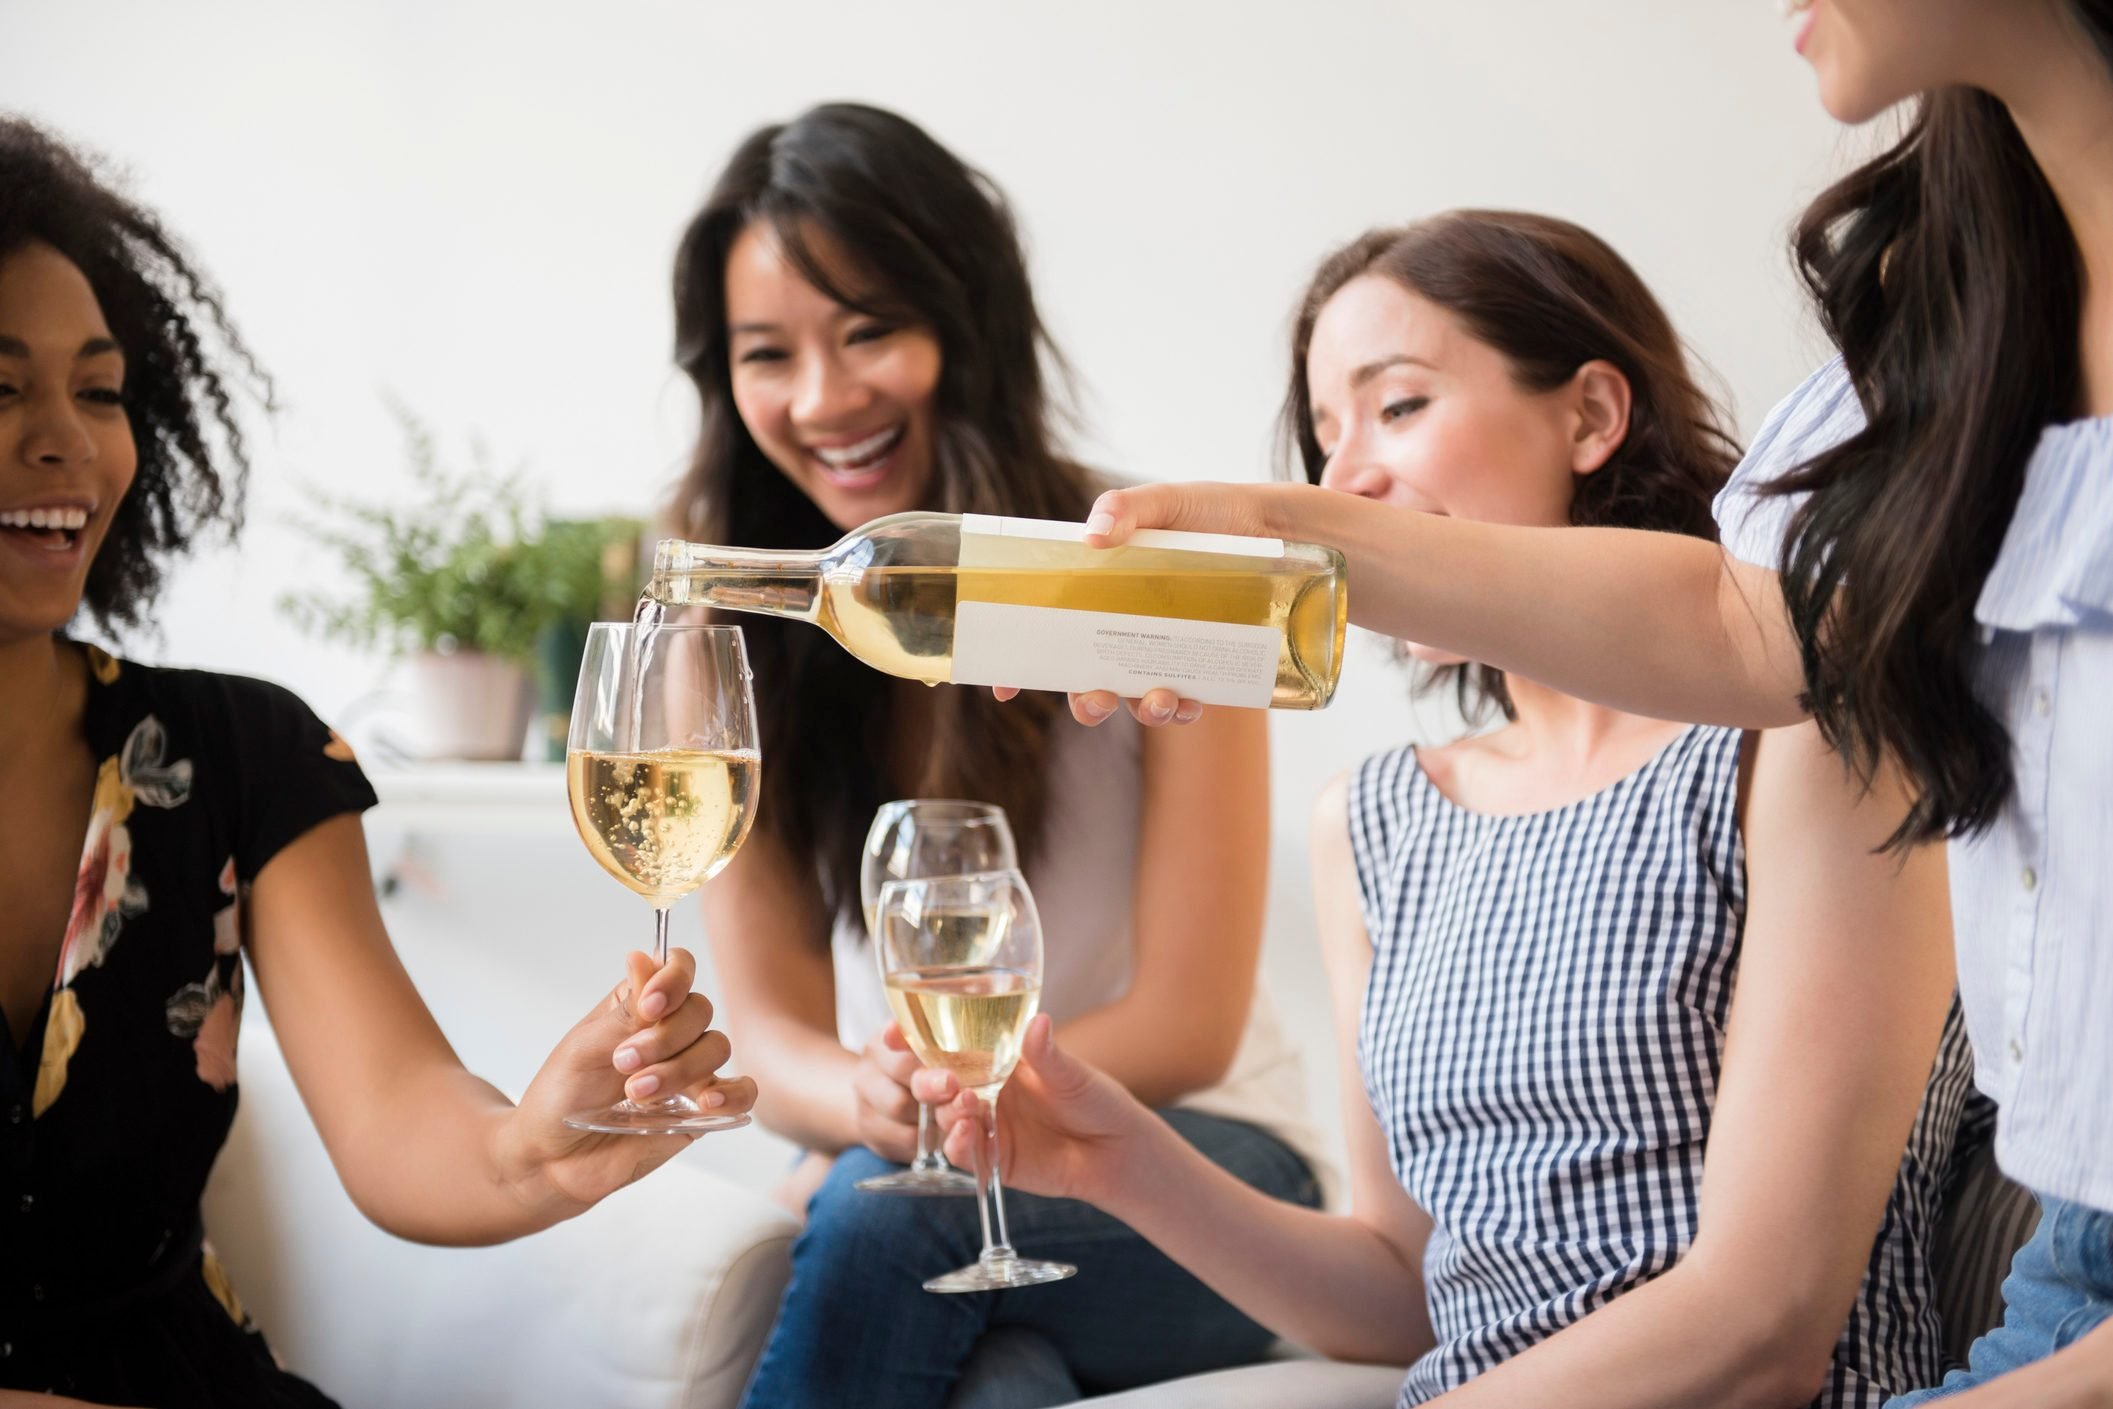 Does Natural Wine Have Health Benefits?